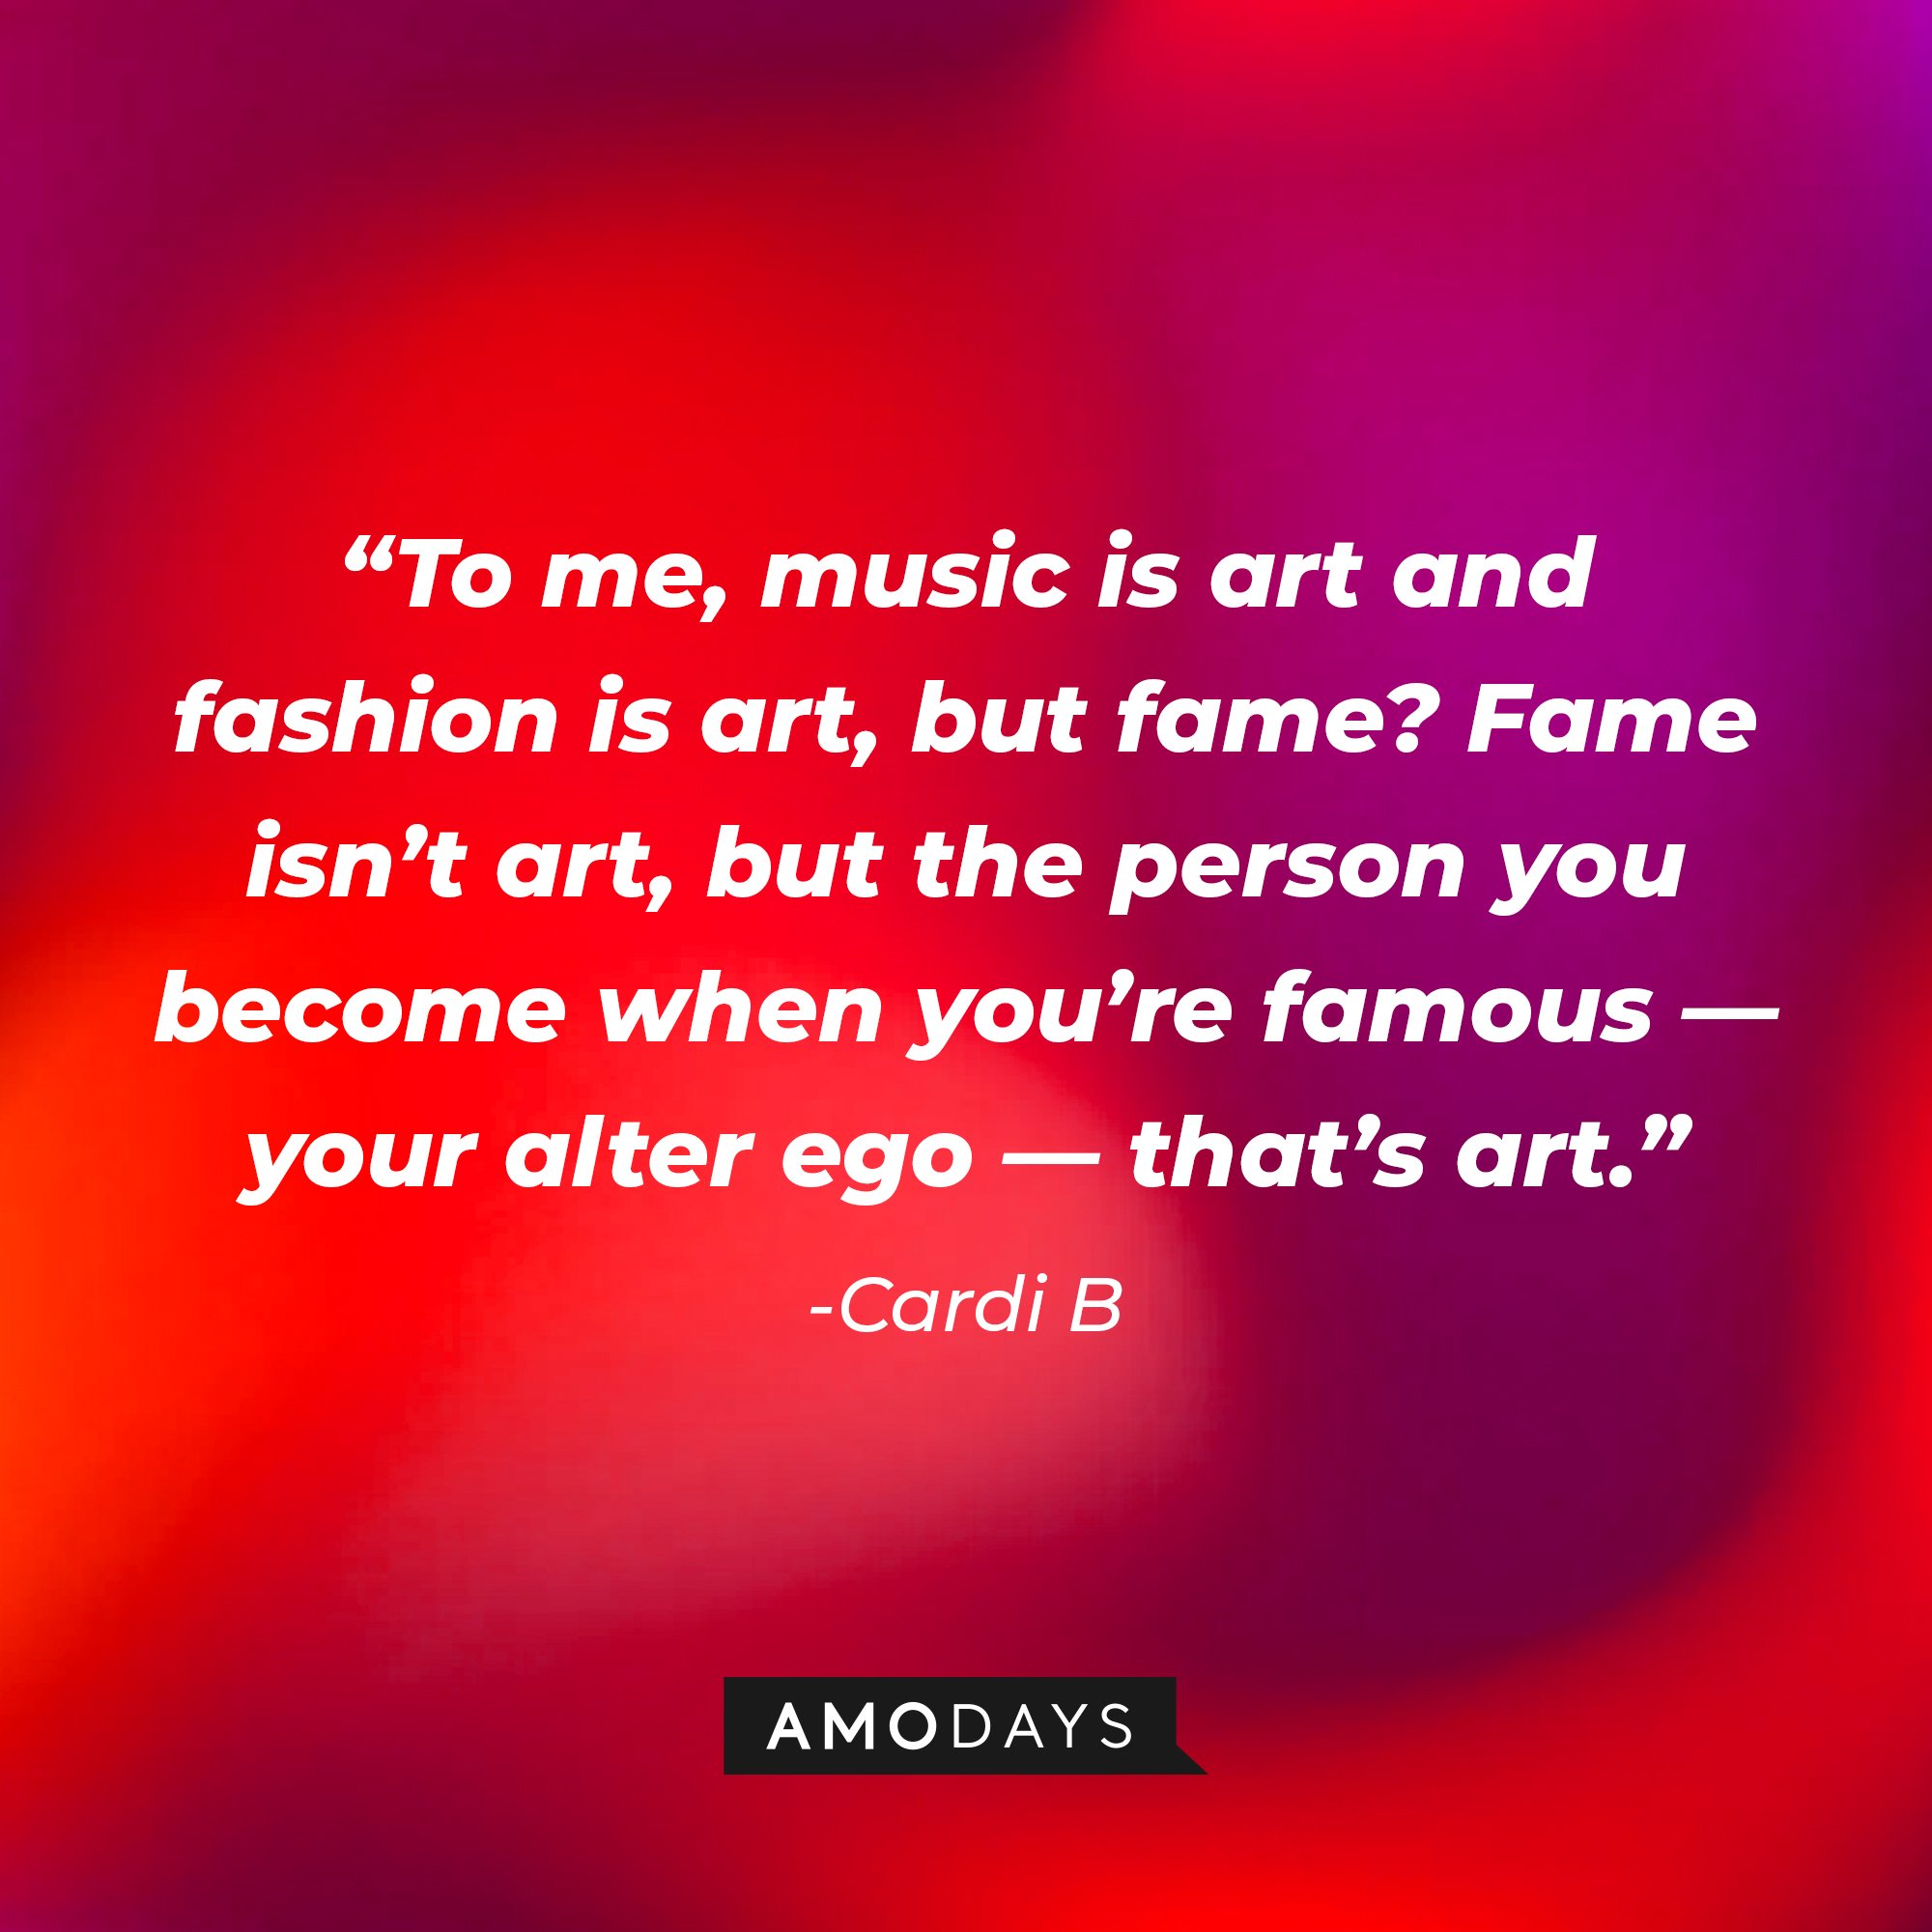 Cardi B's quotes: "To me, music is art and fashion is art, but fame? Fame isn't art, but the person you become when you're famous — your alter ego — that's art." | Image: AmoDays